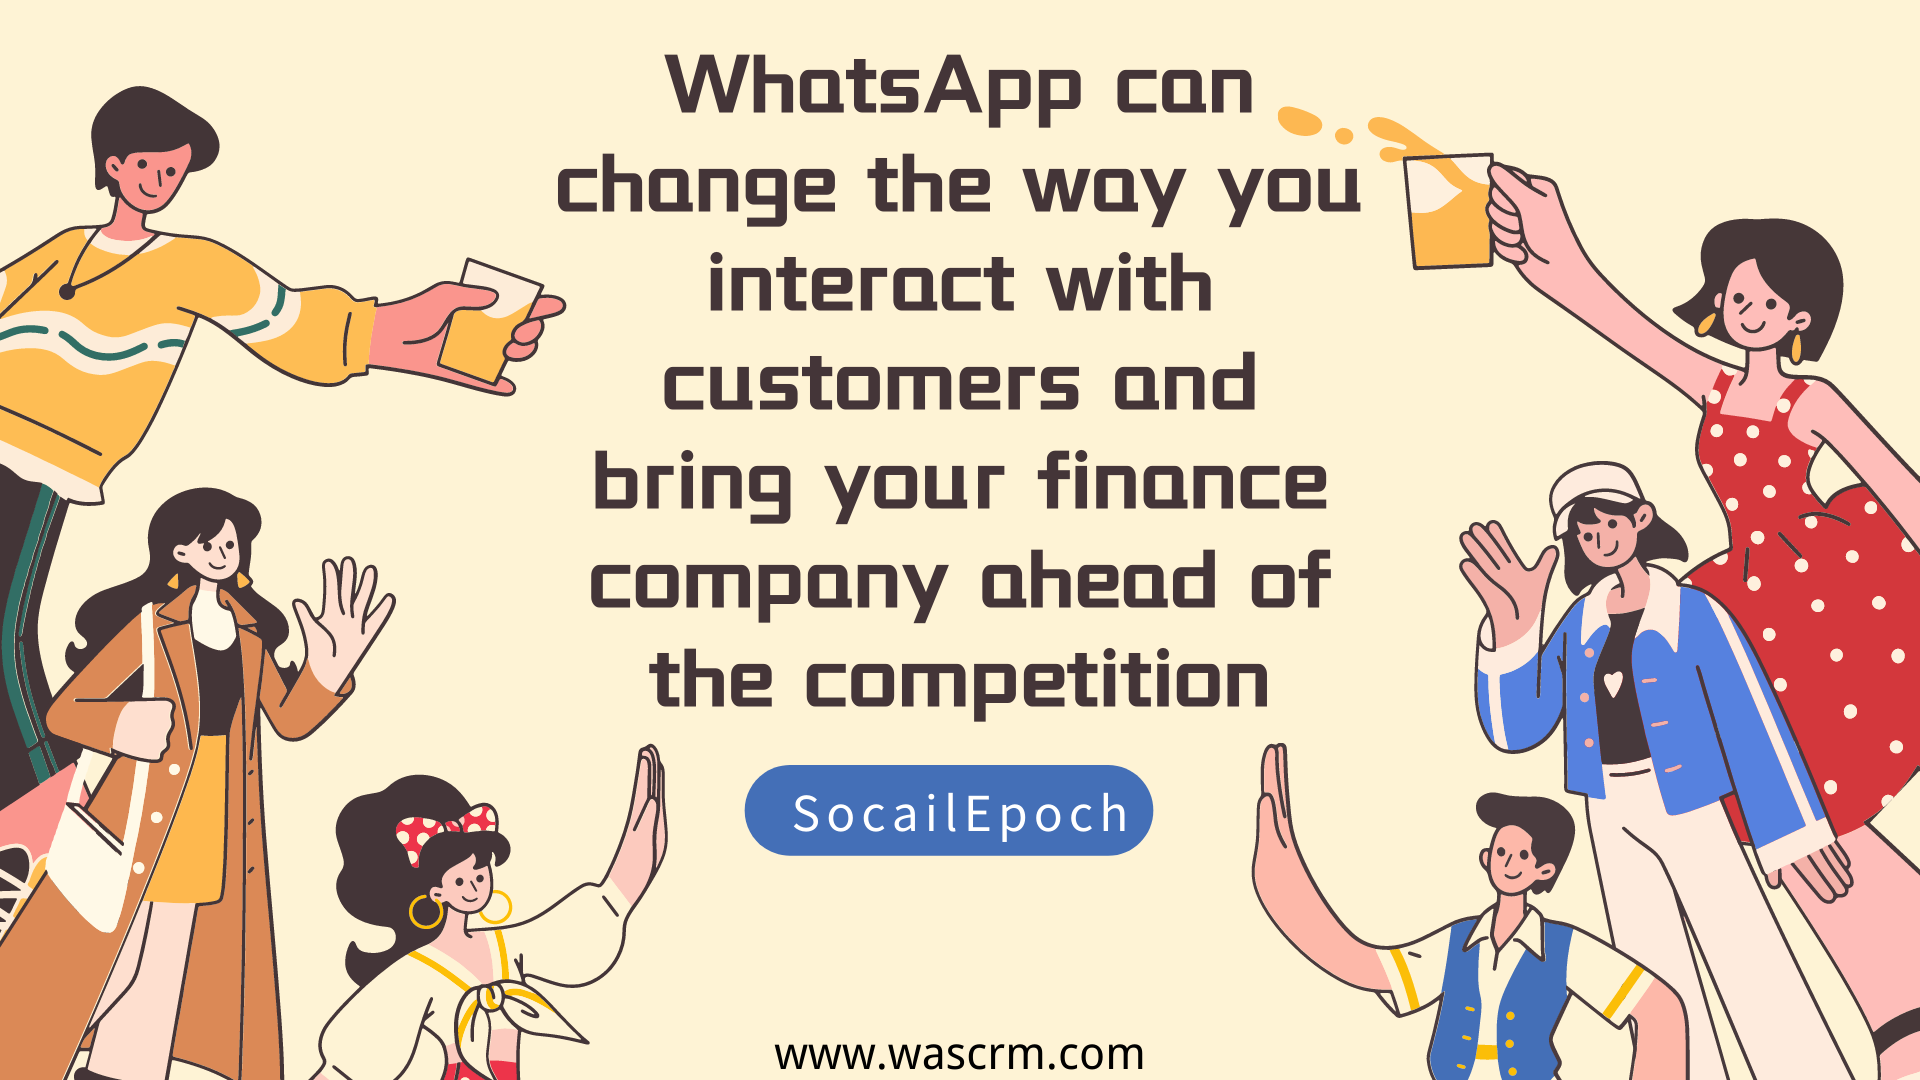 WhatsApp can change the way you interact with customers and bring your finance company ahead of the competition